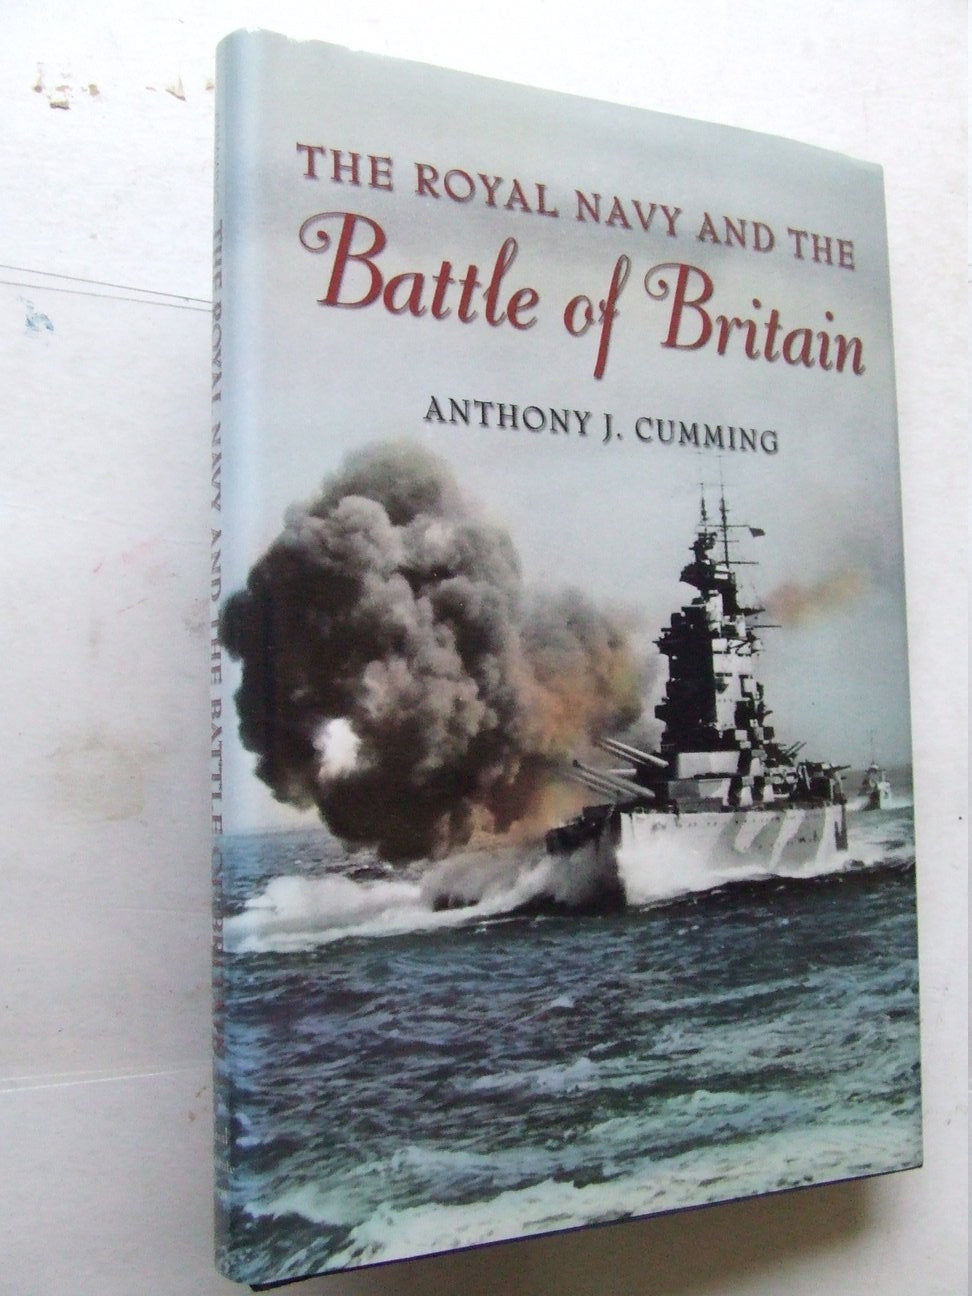 The Royal Navy and the Battle of Britain